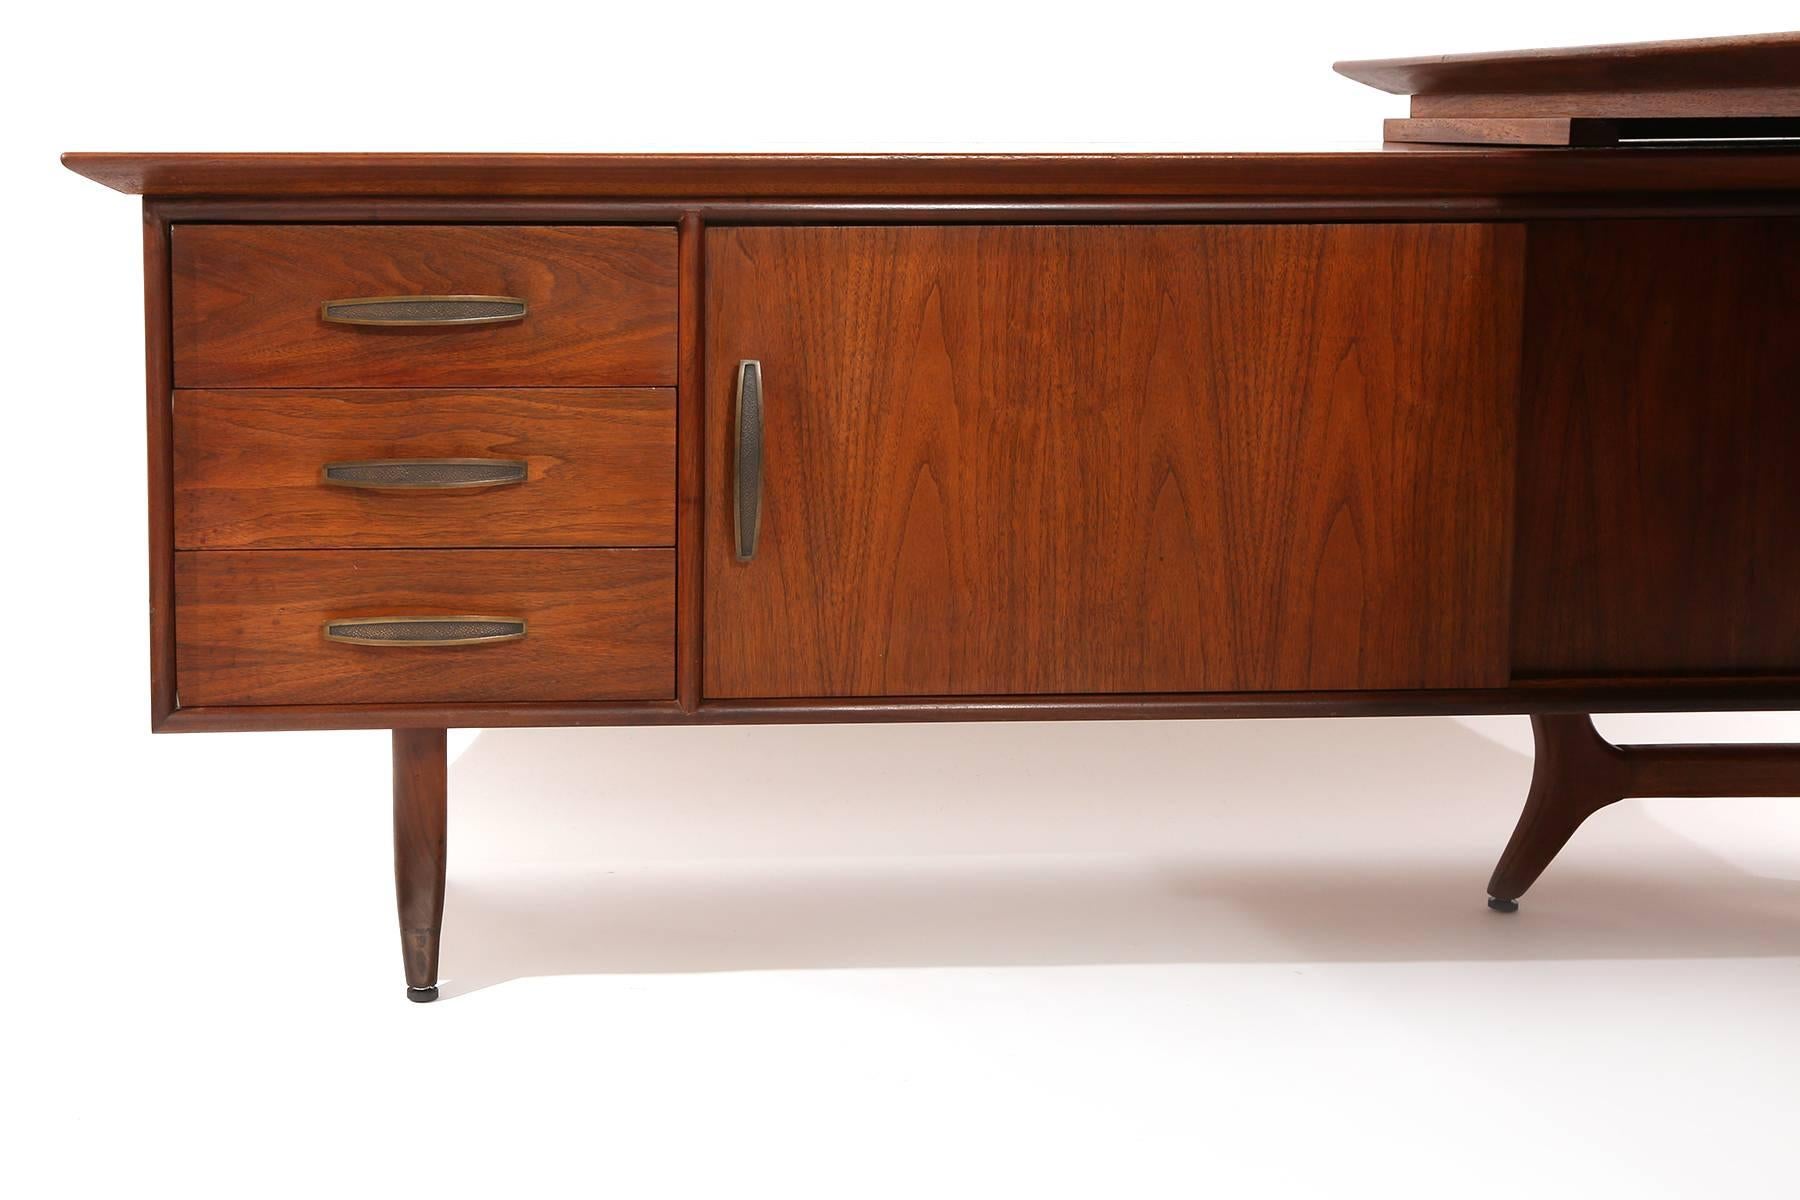 Desk and credenza by Modeline circa late 1950s. This example has pebbled brass handles solid walnut legs and banding and fantastic graining to the tops and sides.